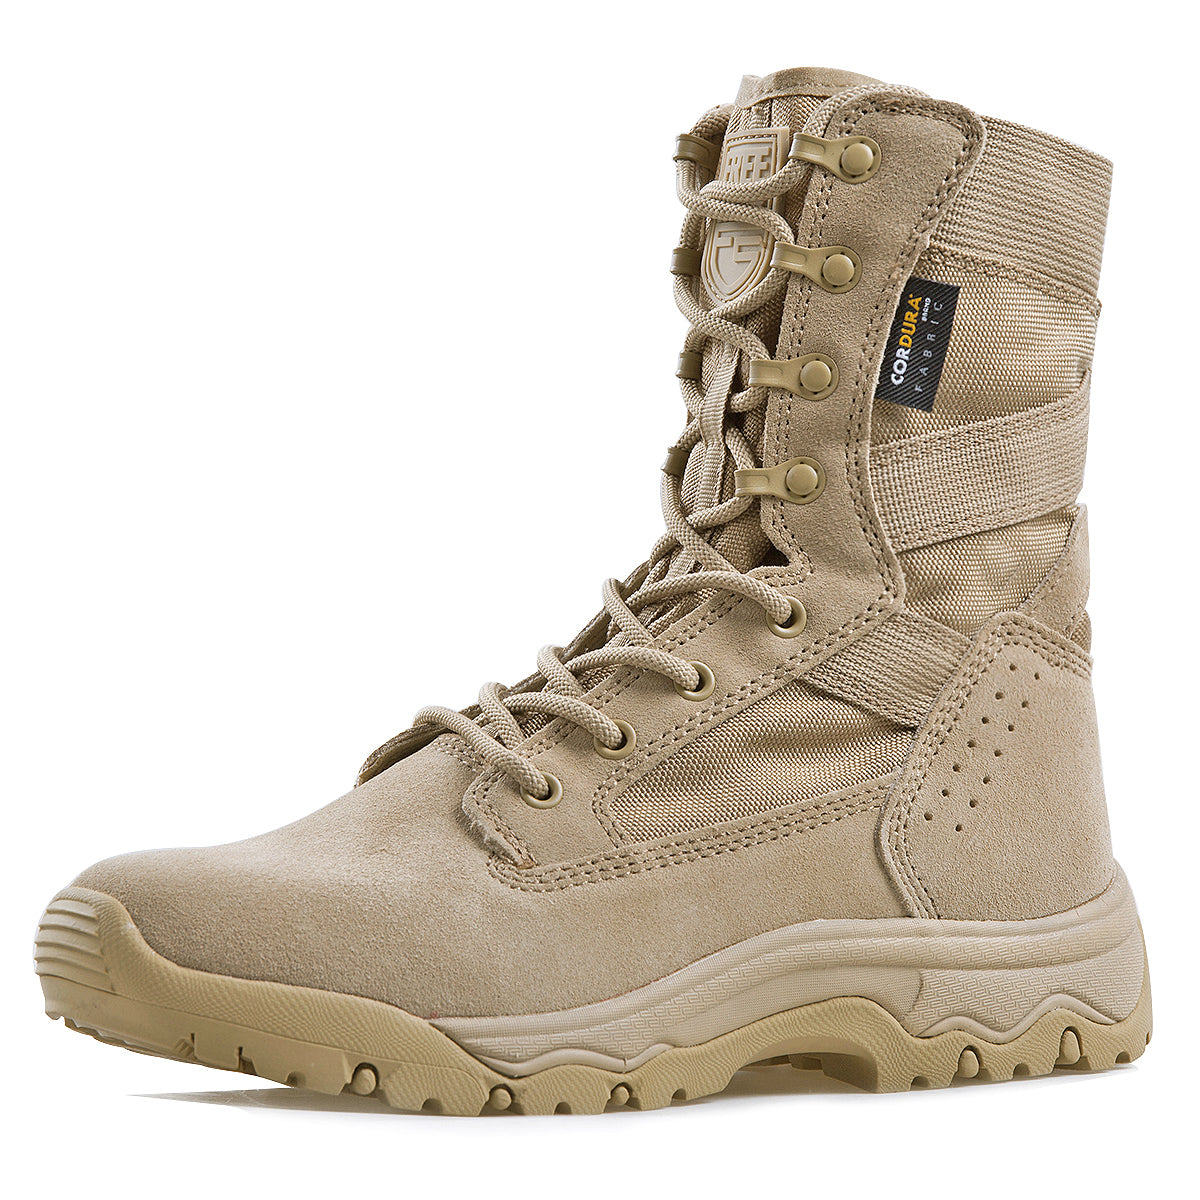 FREE SOLDIER Men's Tactical Waterproof Lightweight Hiking Boots Military Combat Boots Work Boots 